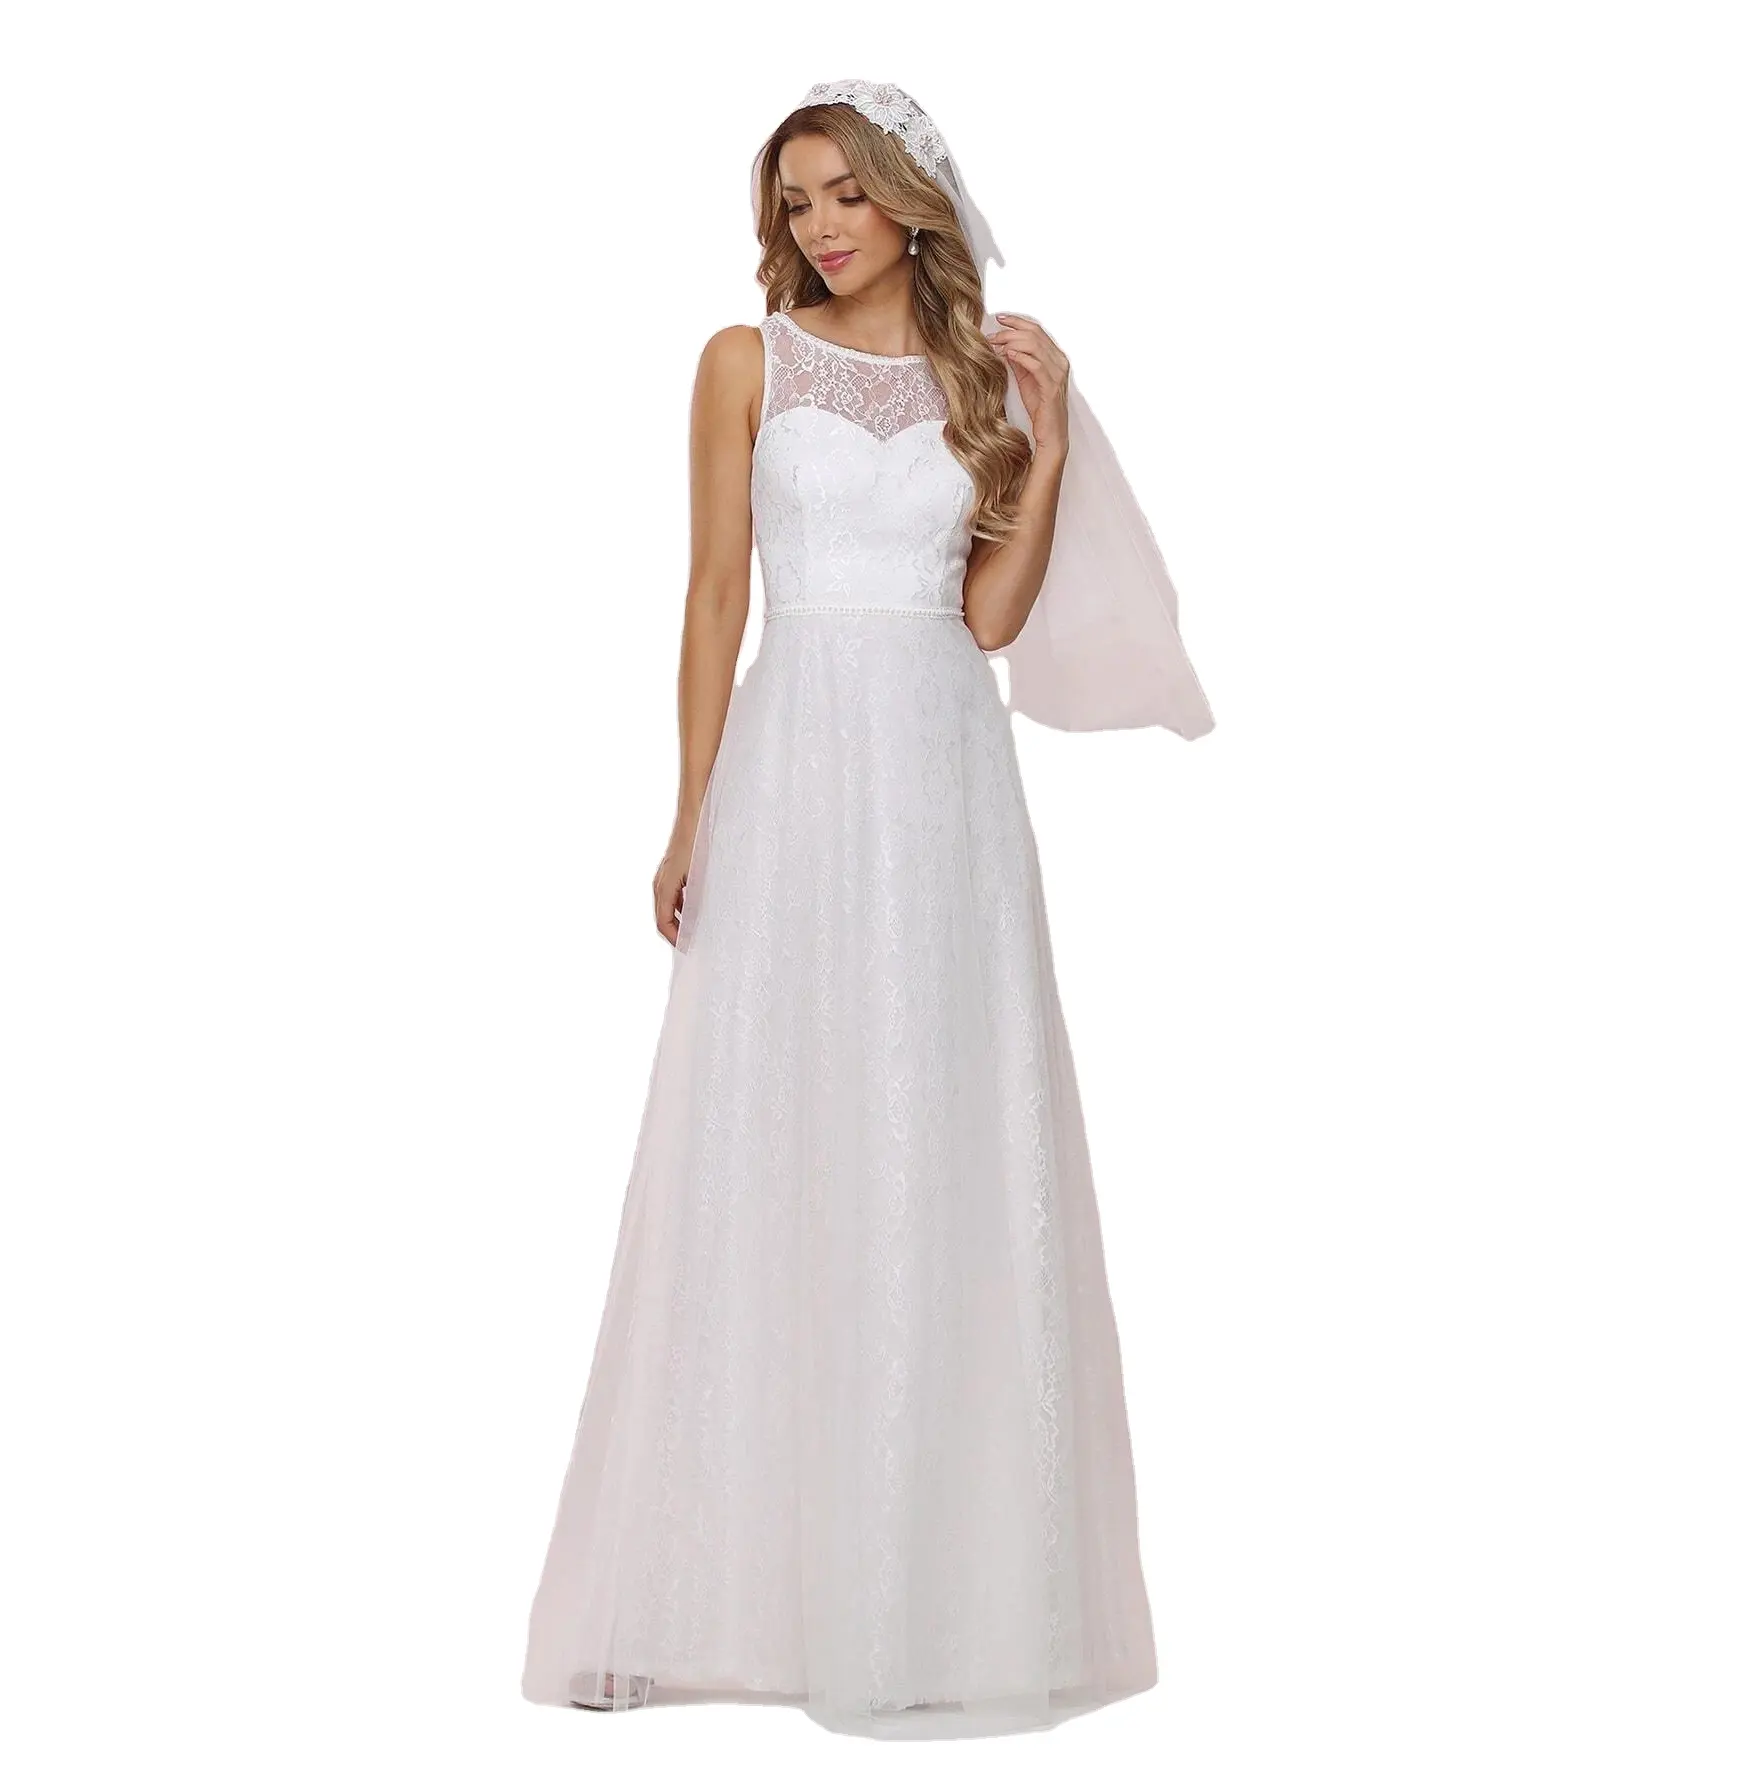 Lace Embroidered Bride Gown Prom Dresses Bridesmaid White Wedding Dresses